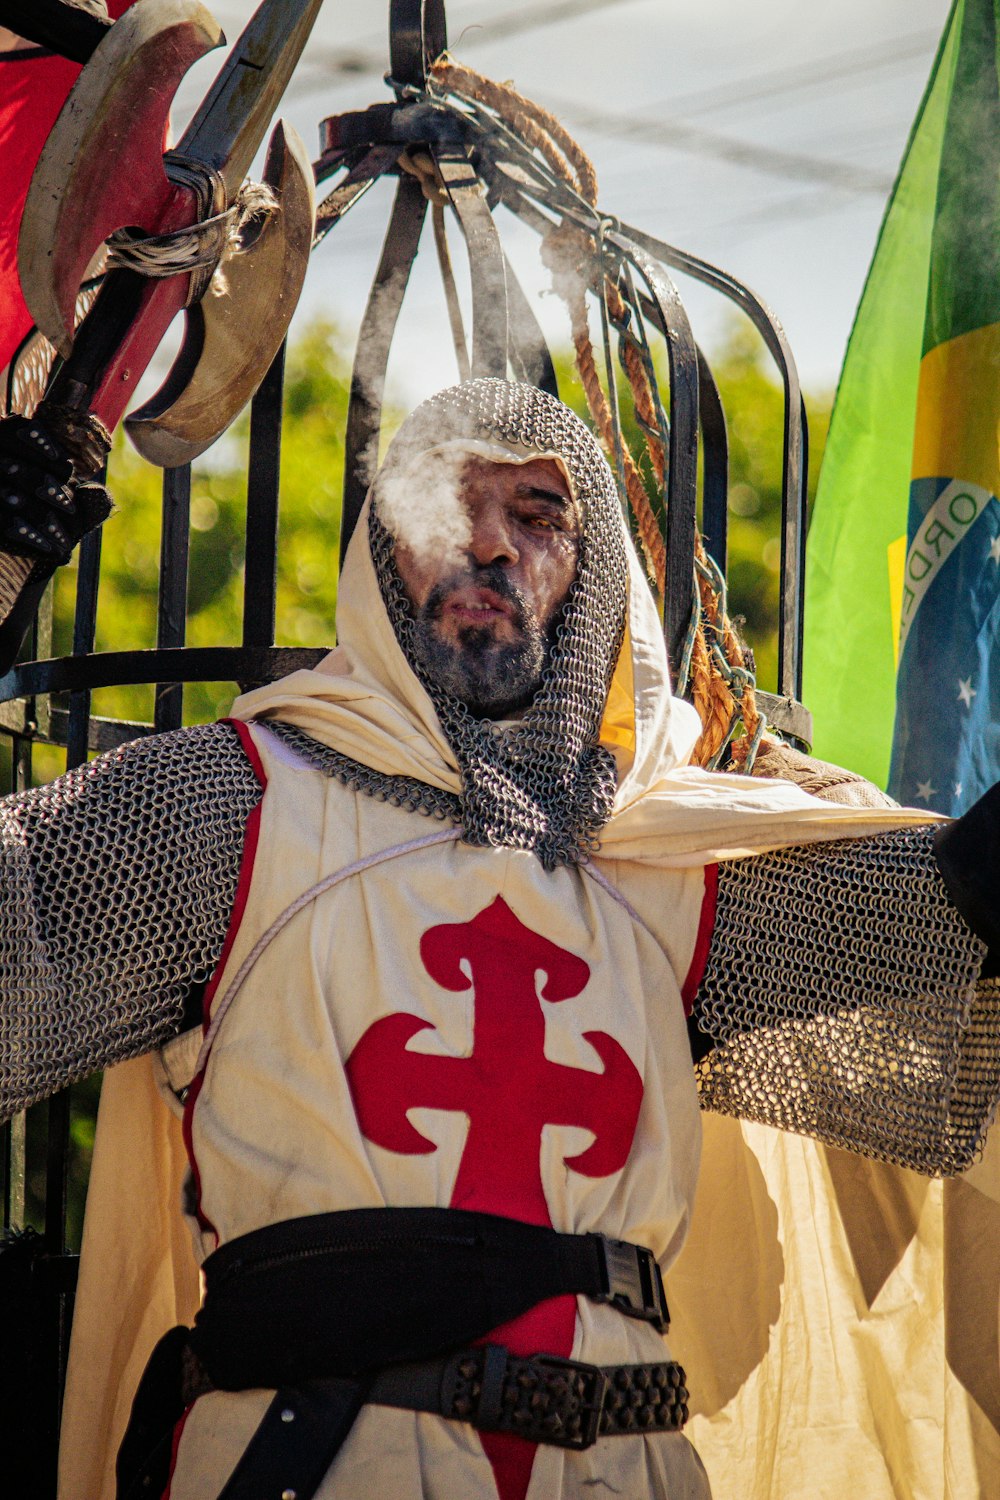 a man dressed as a knight holding a sword